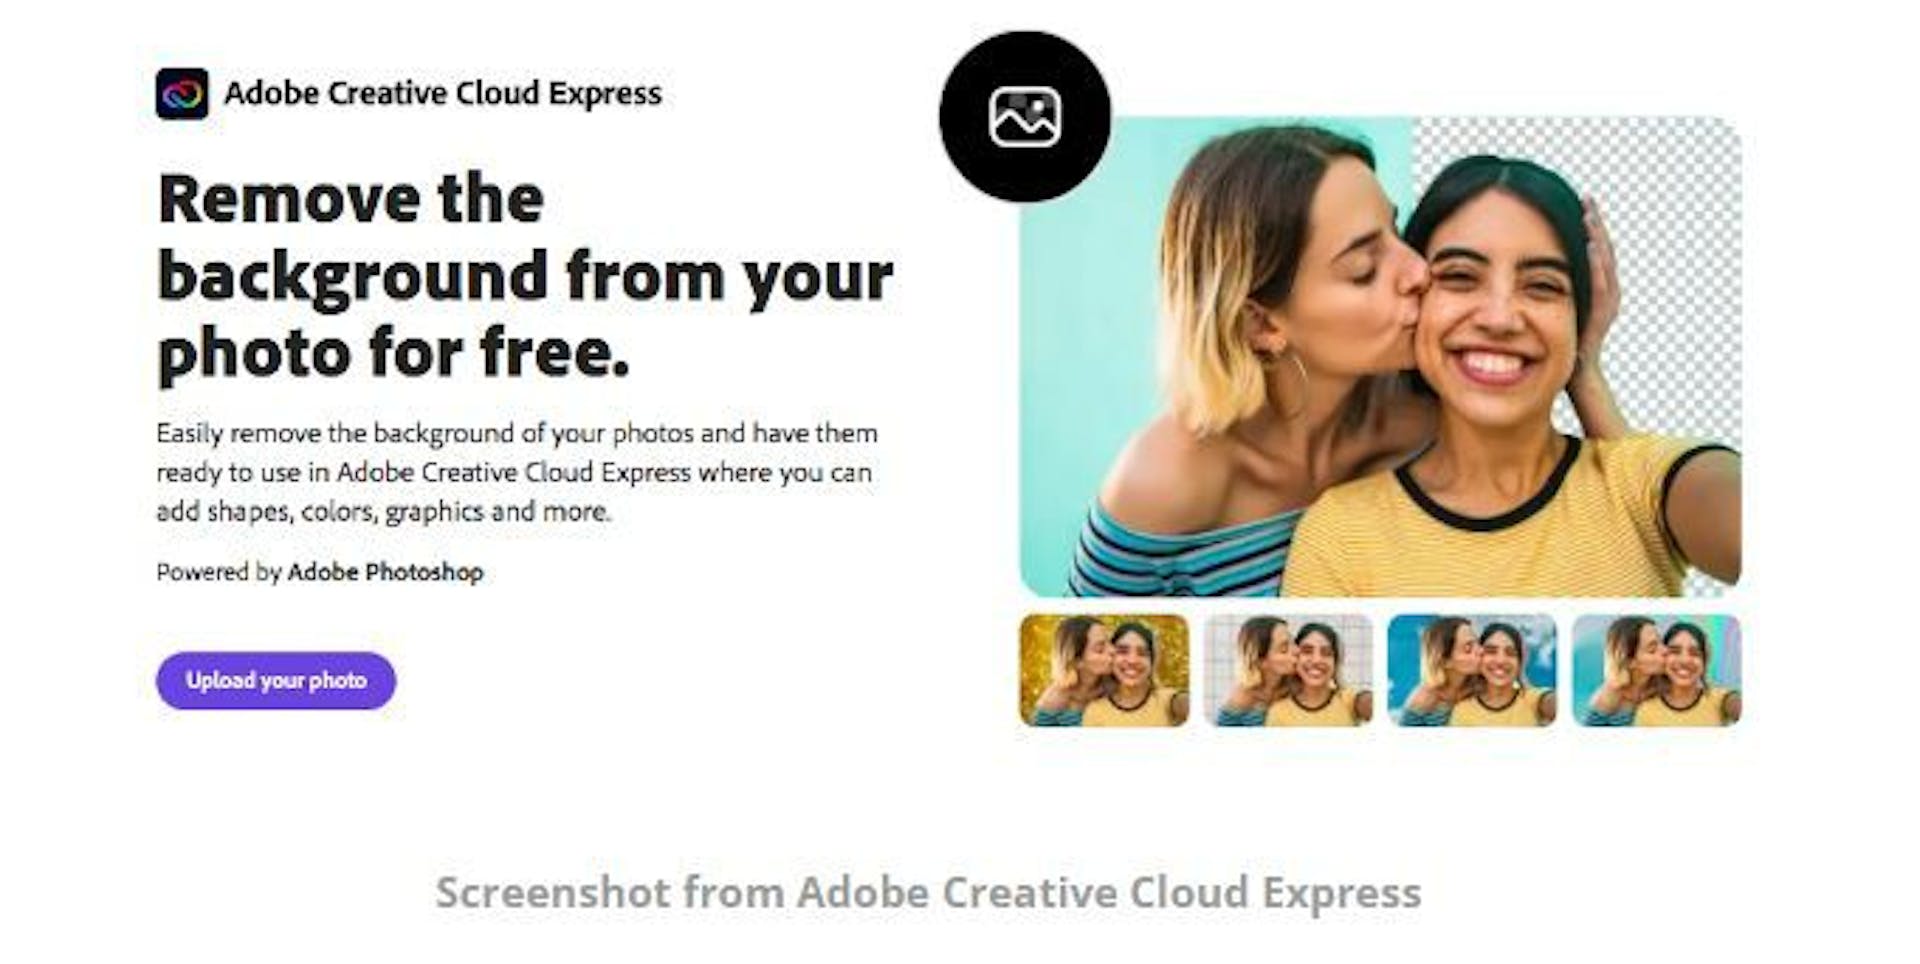 Clear structuring on Adobe Creative Cloud Express Product page